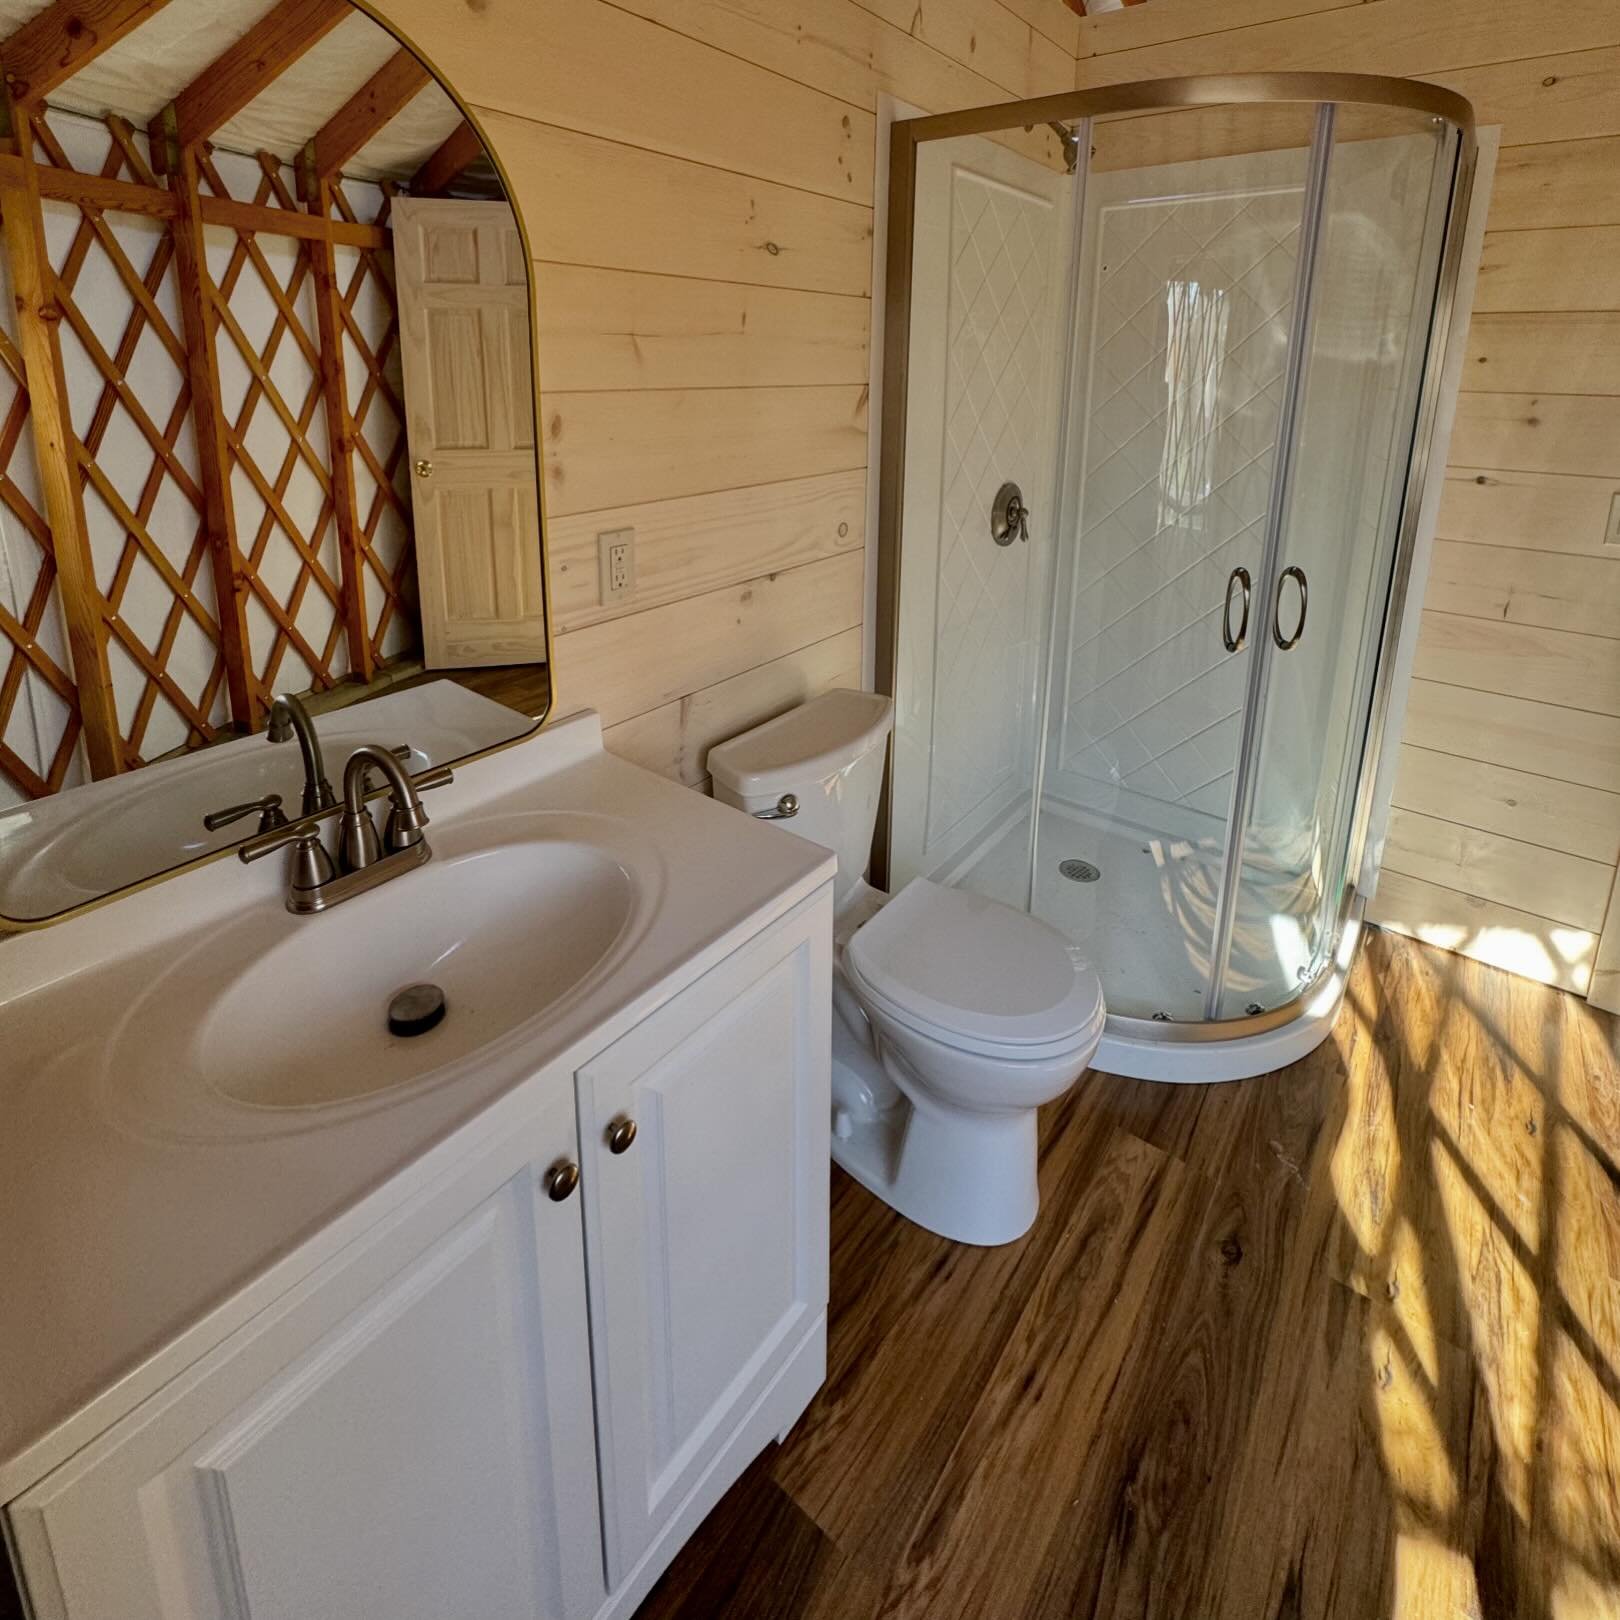 Who loves a hot shower after a long hike?! We do! Our yurts each have a small bathroom with all the necessities for a comfortable stay. We hope all of our guests will enjoy! 

#glampingprofessional #luxuryoutdoorliving #yurt #acadianationalpark #main